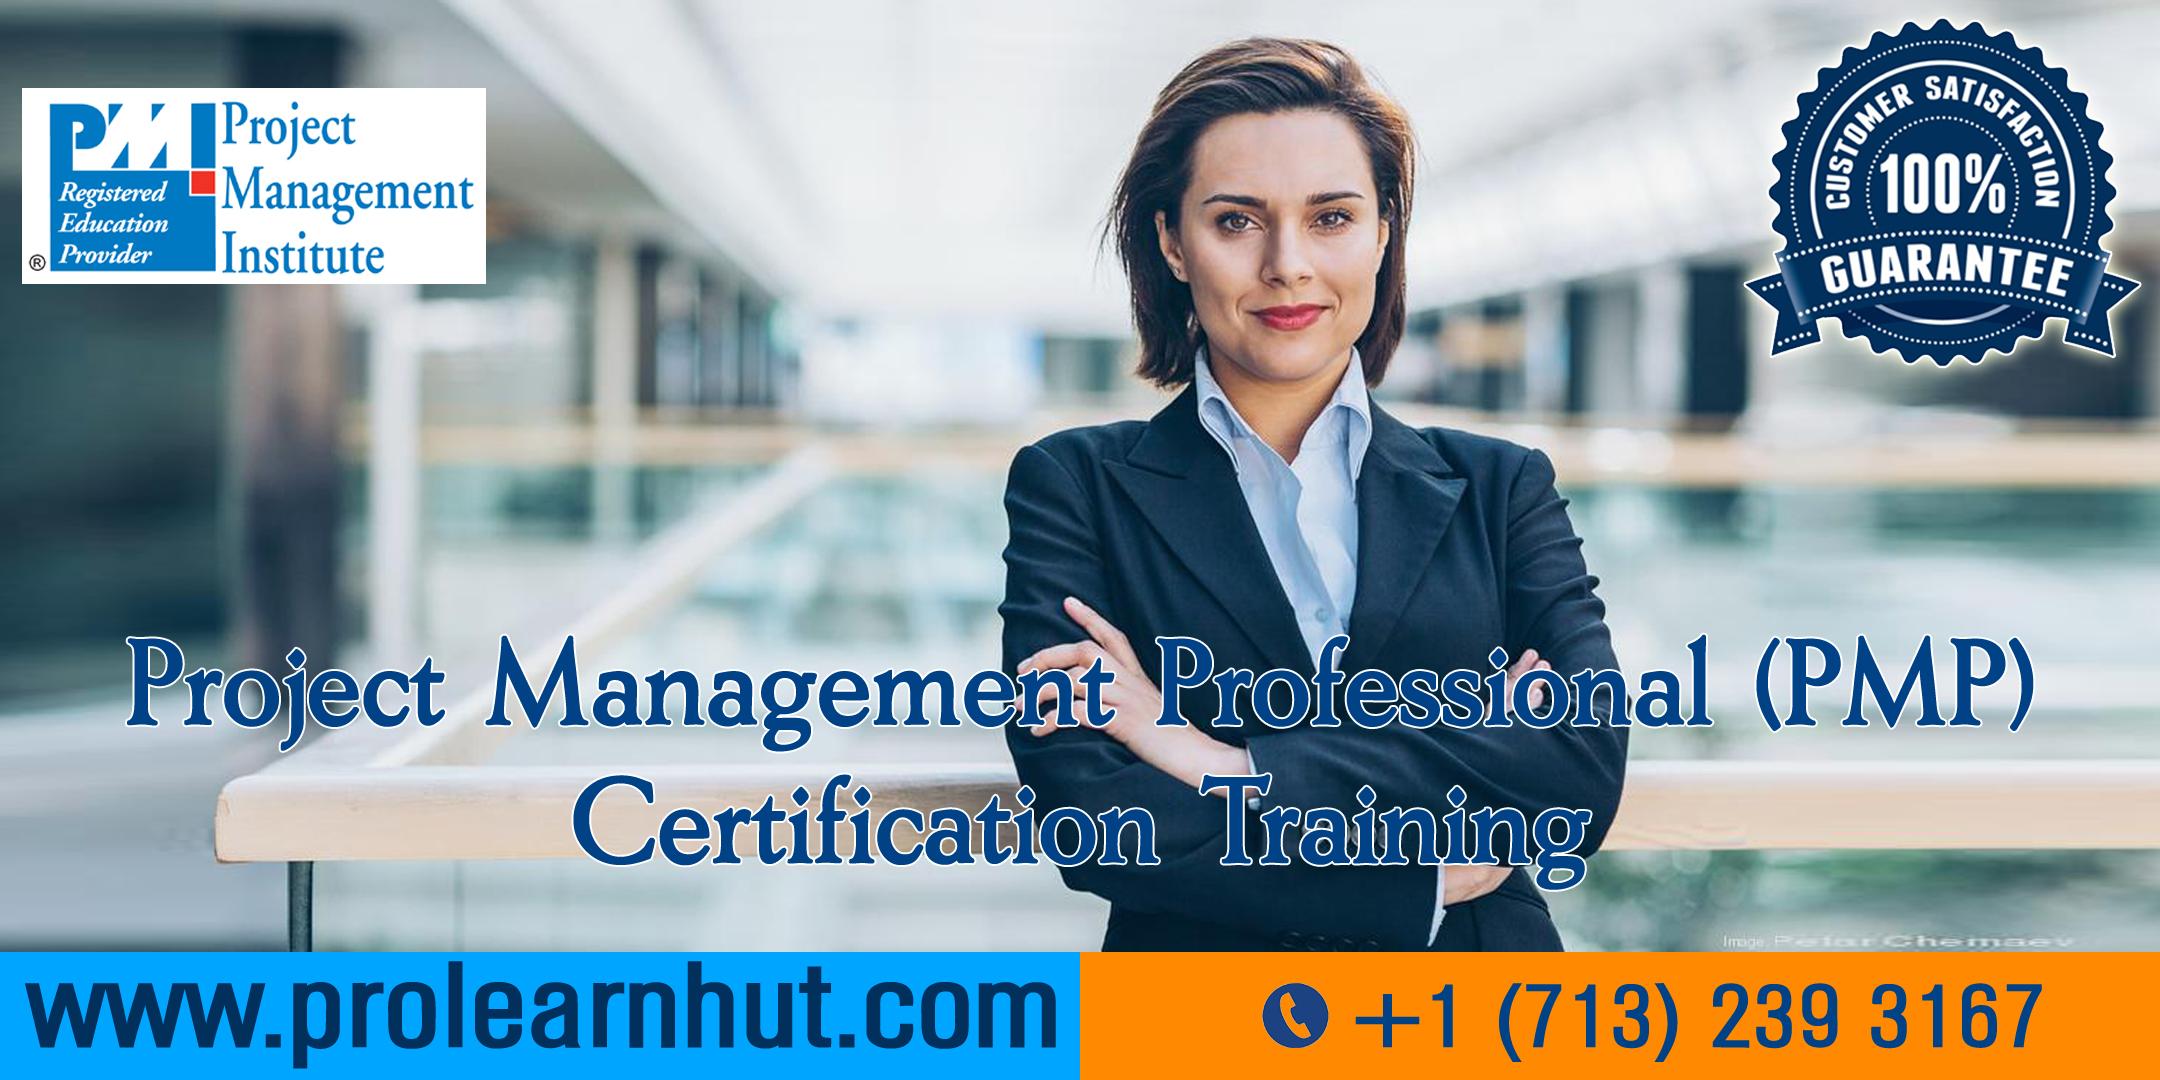 PMP Certification | Project Management Certification| PMP Training in St. Louis, MO | ProLearnHut